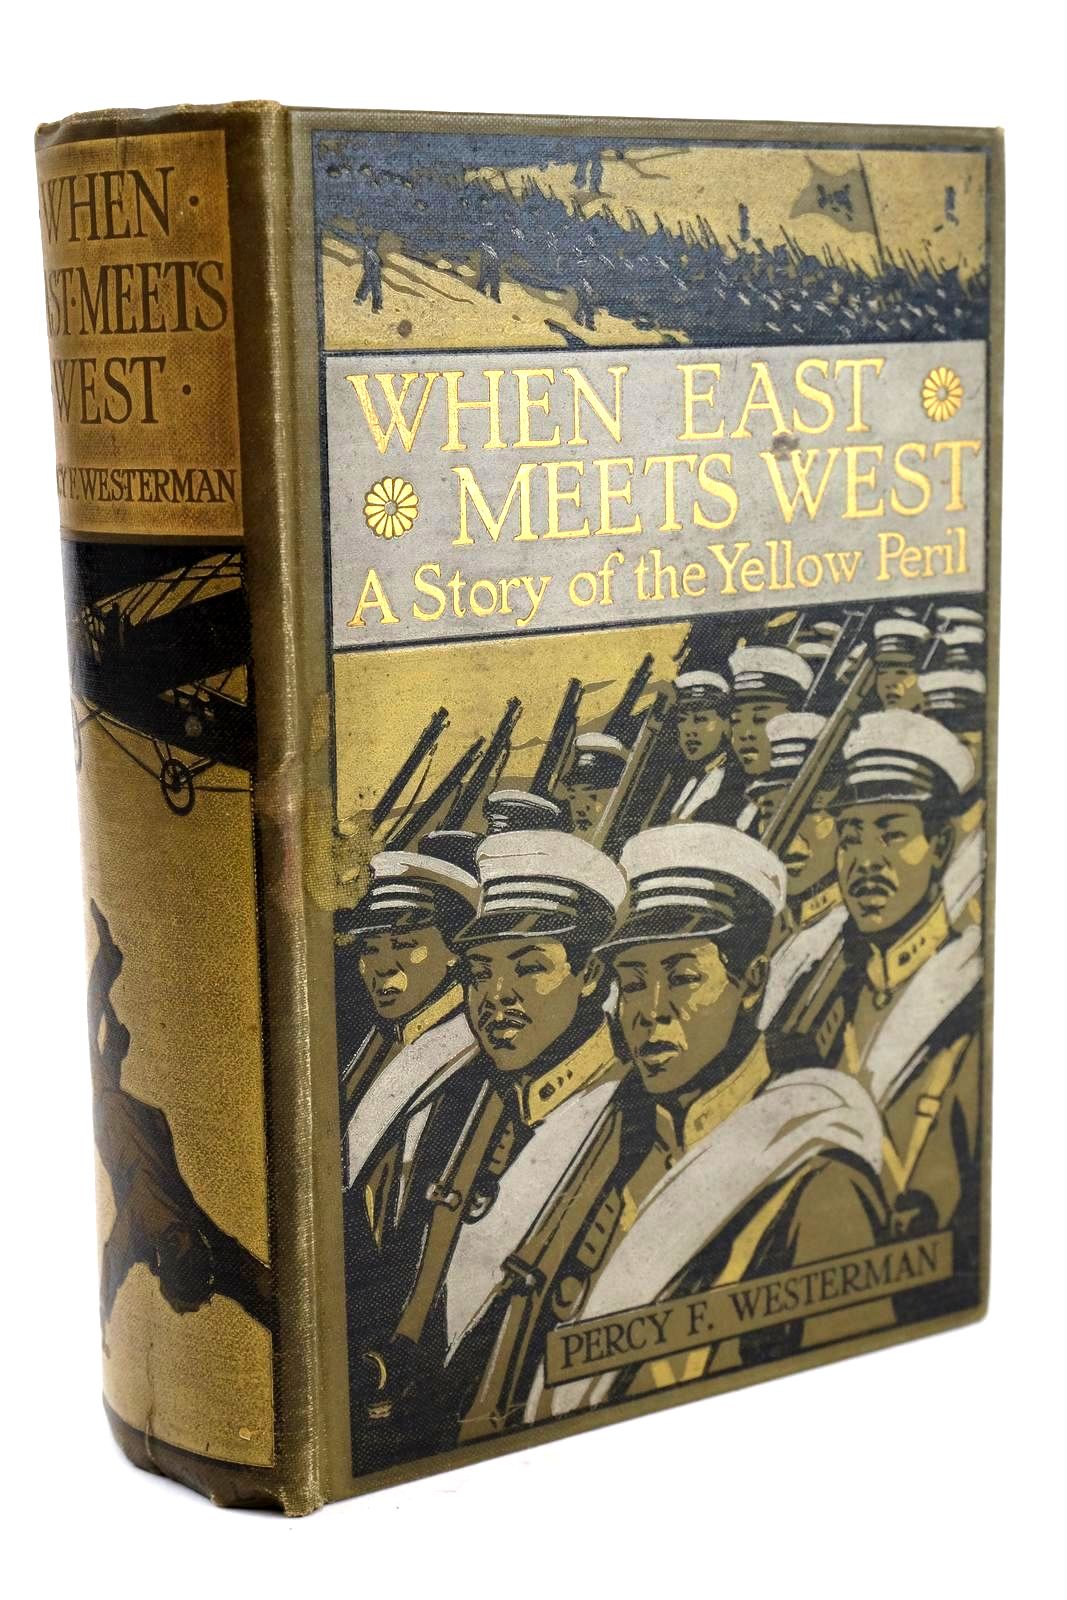 Photo of WHEN EAST MEETS WEST written by Westerman, Percy F. illustrated by Padday, C.M. published by Blackie & Son Ltd. (STOCK CODE: 1324251)  for sale by Stella & Rose's Books